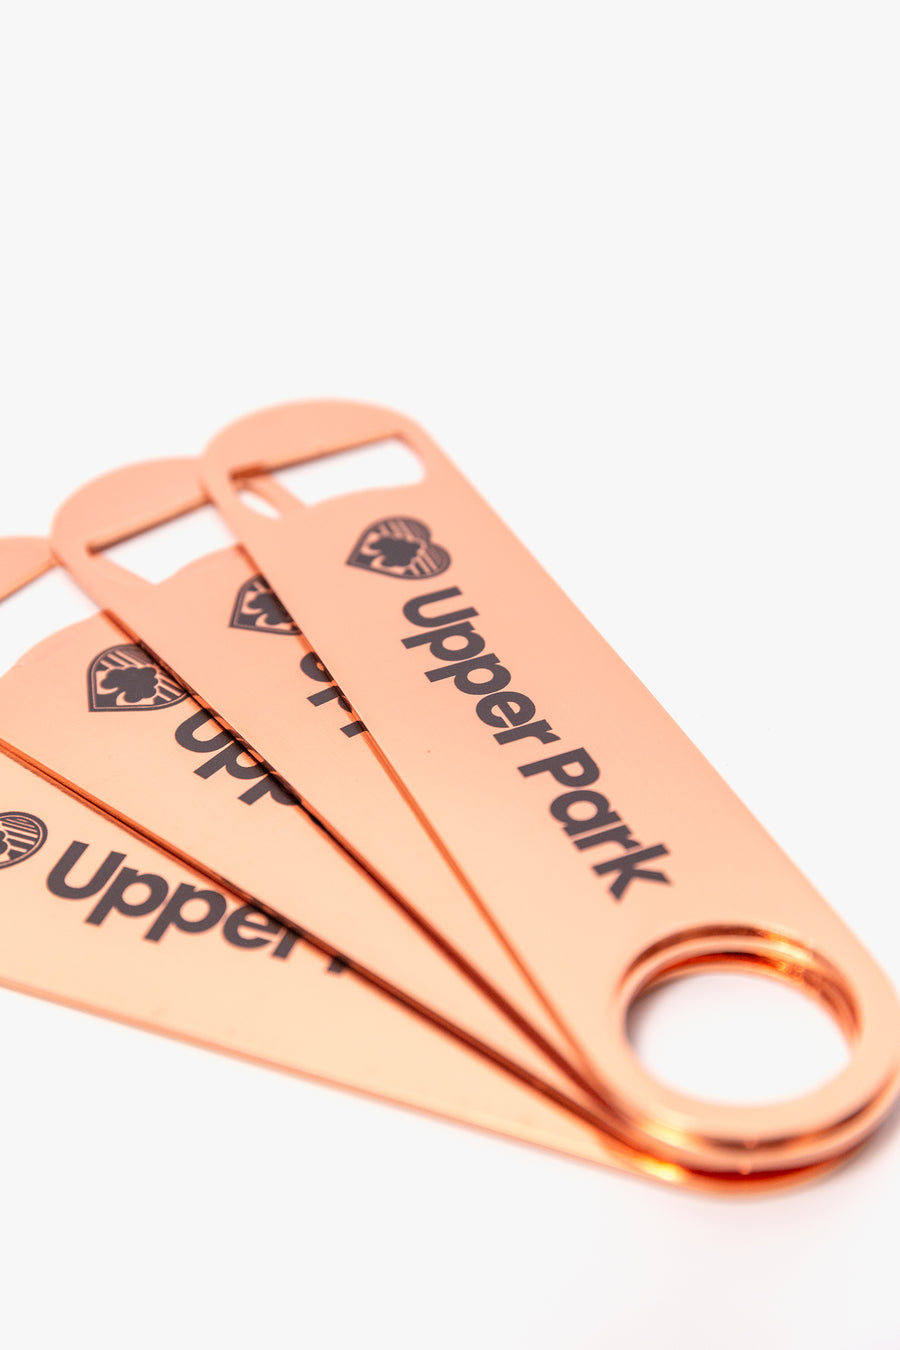 rose gold bottle opener with giant text that says "Upper Park" laying on a flat grey background